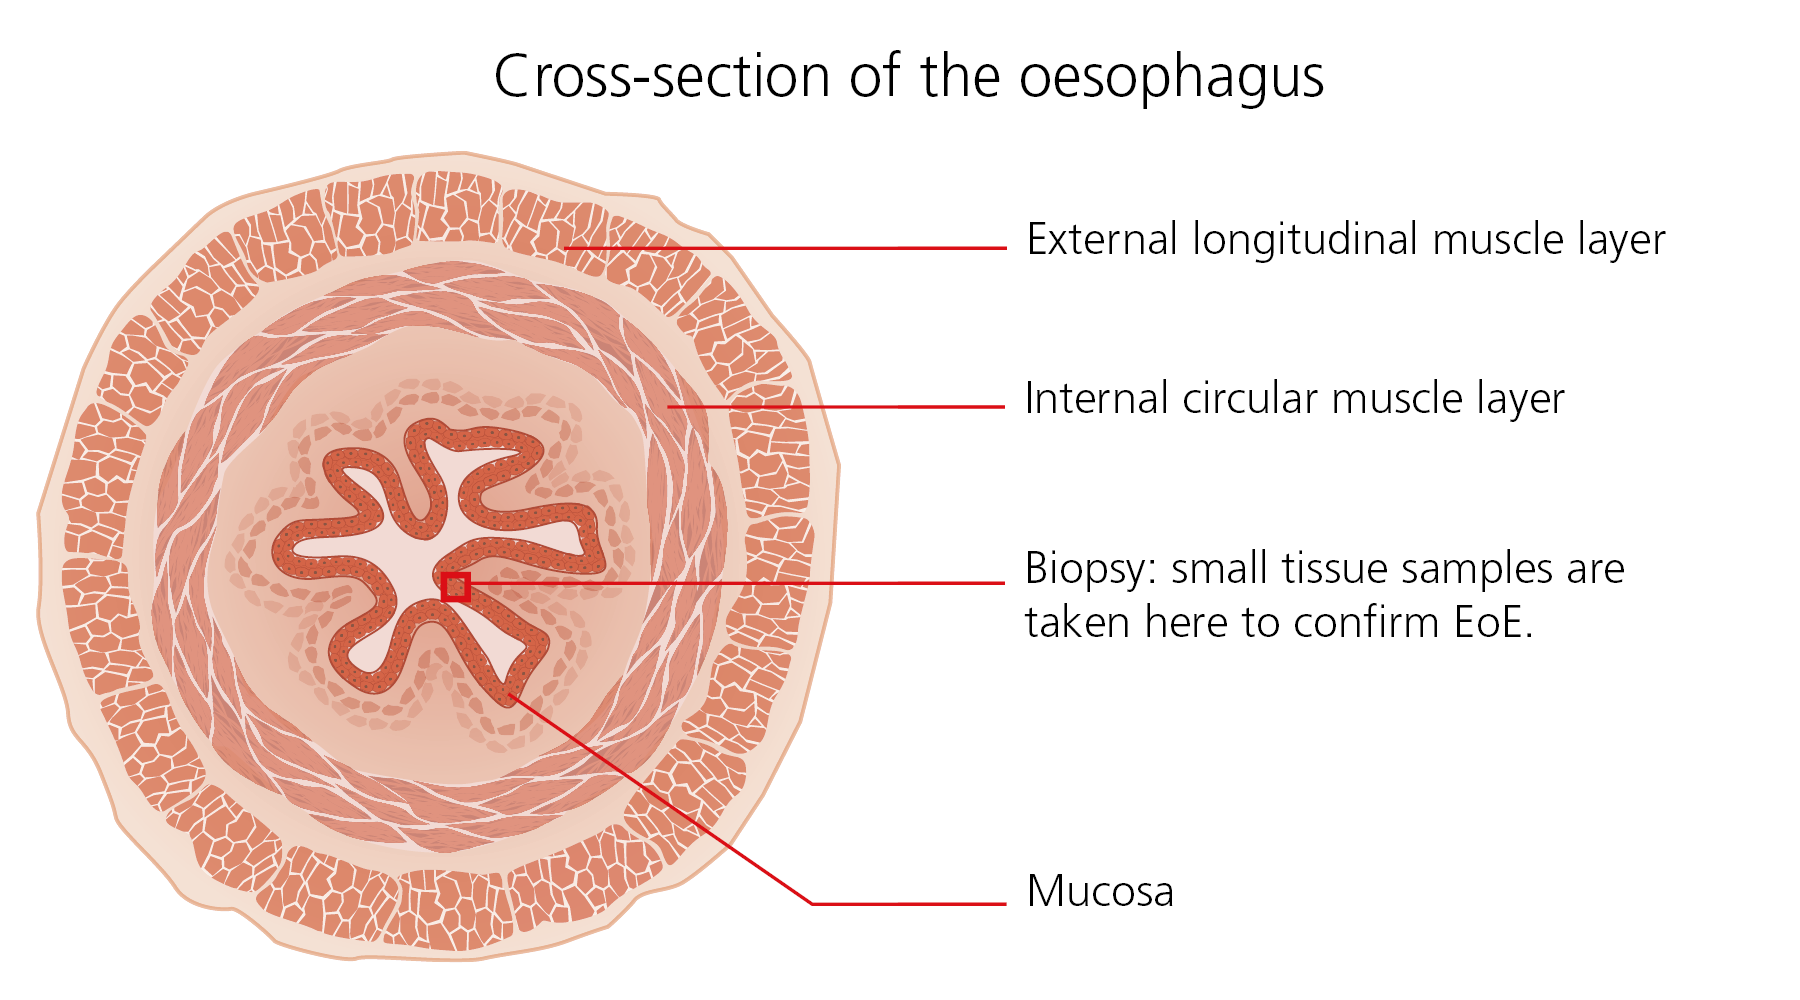 Cross-section of the oesophagus